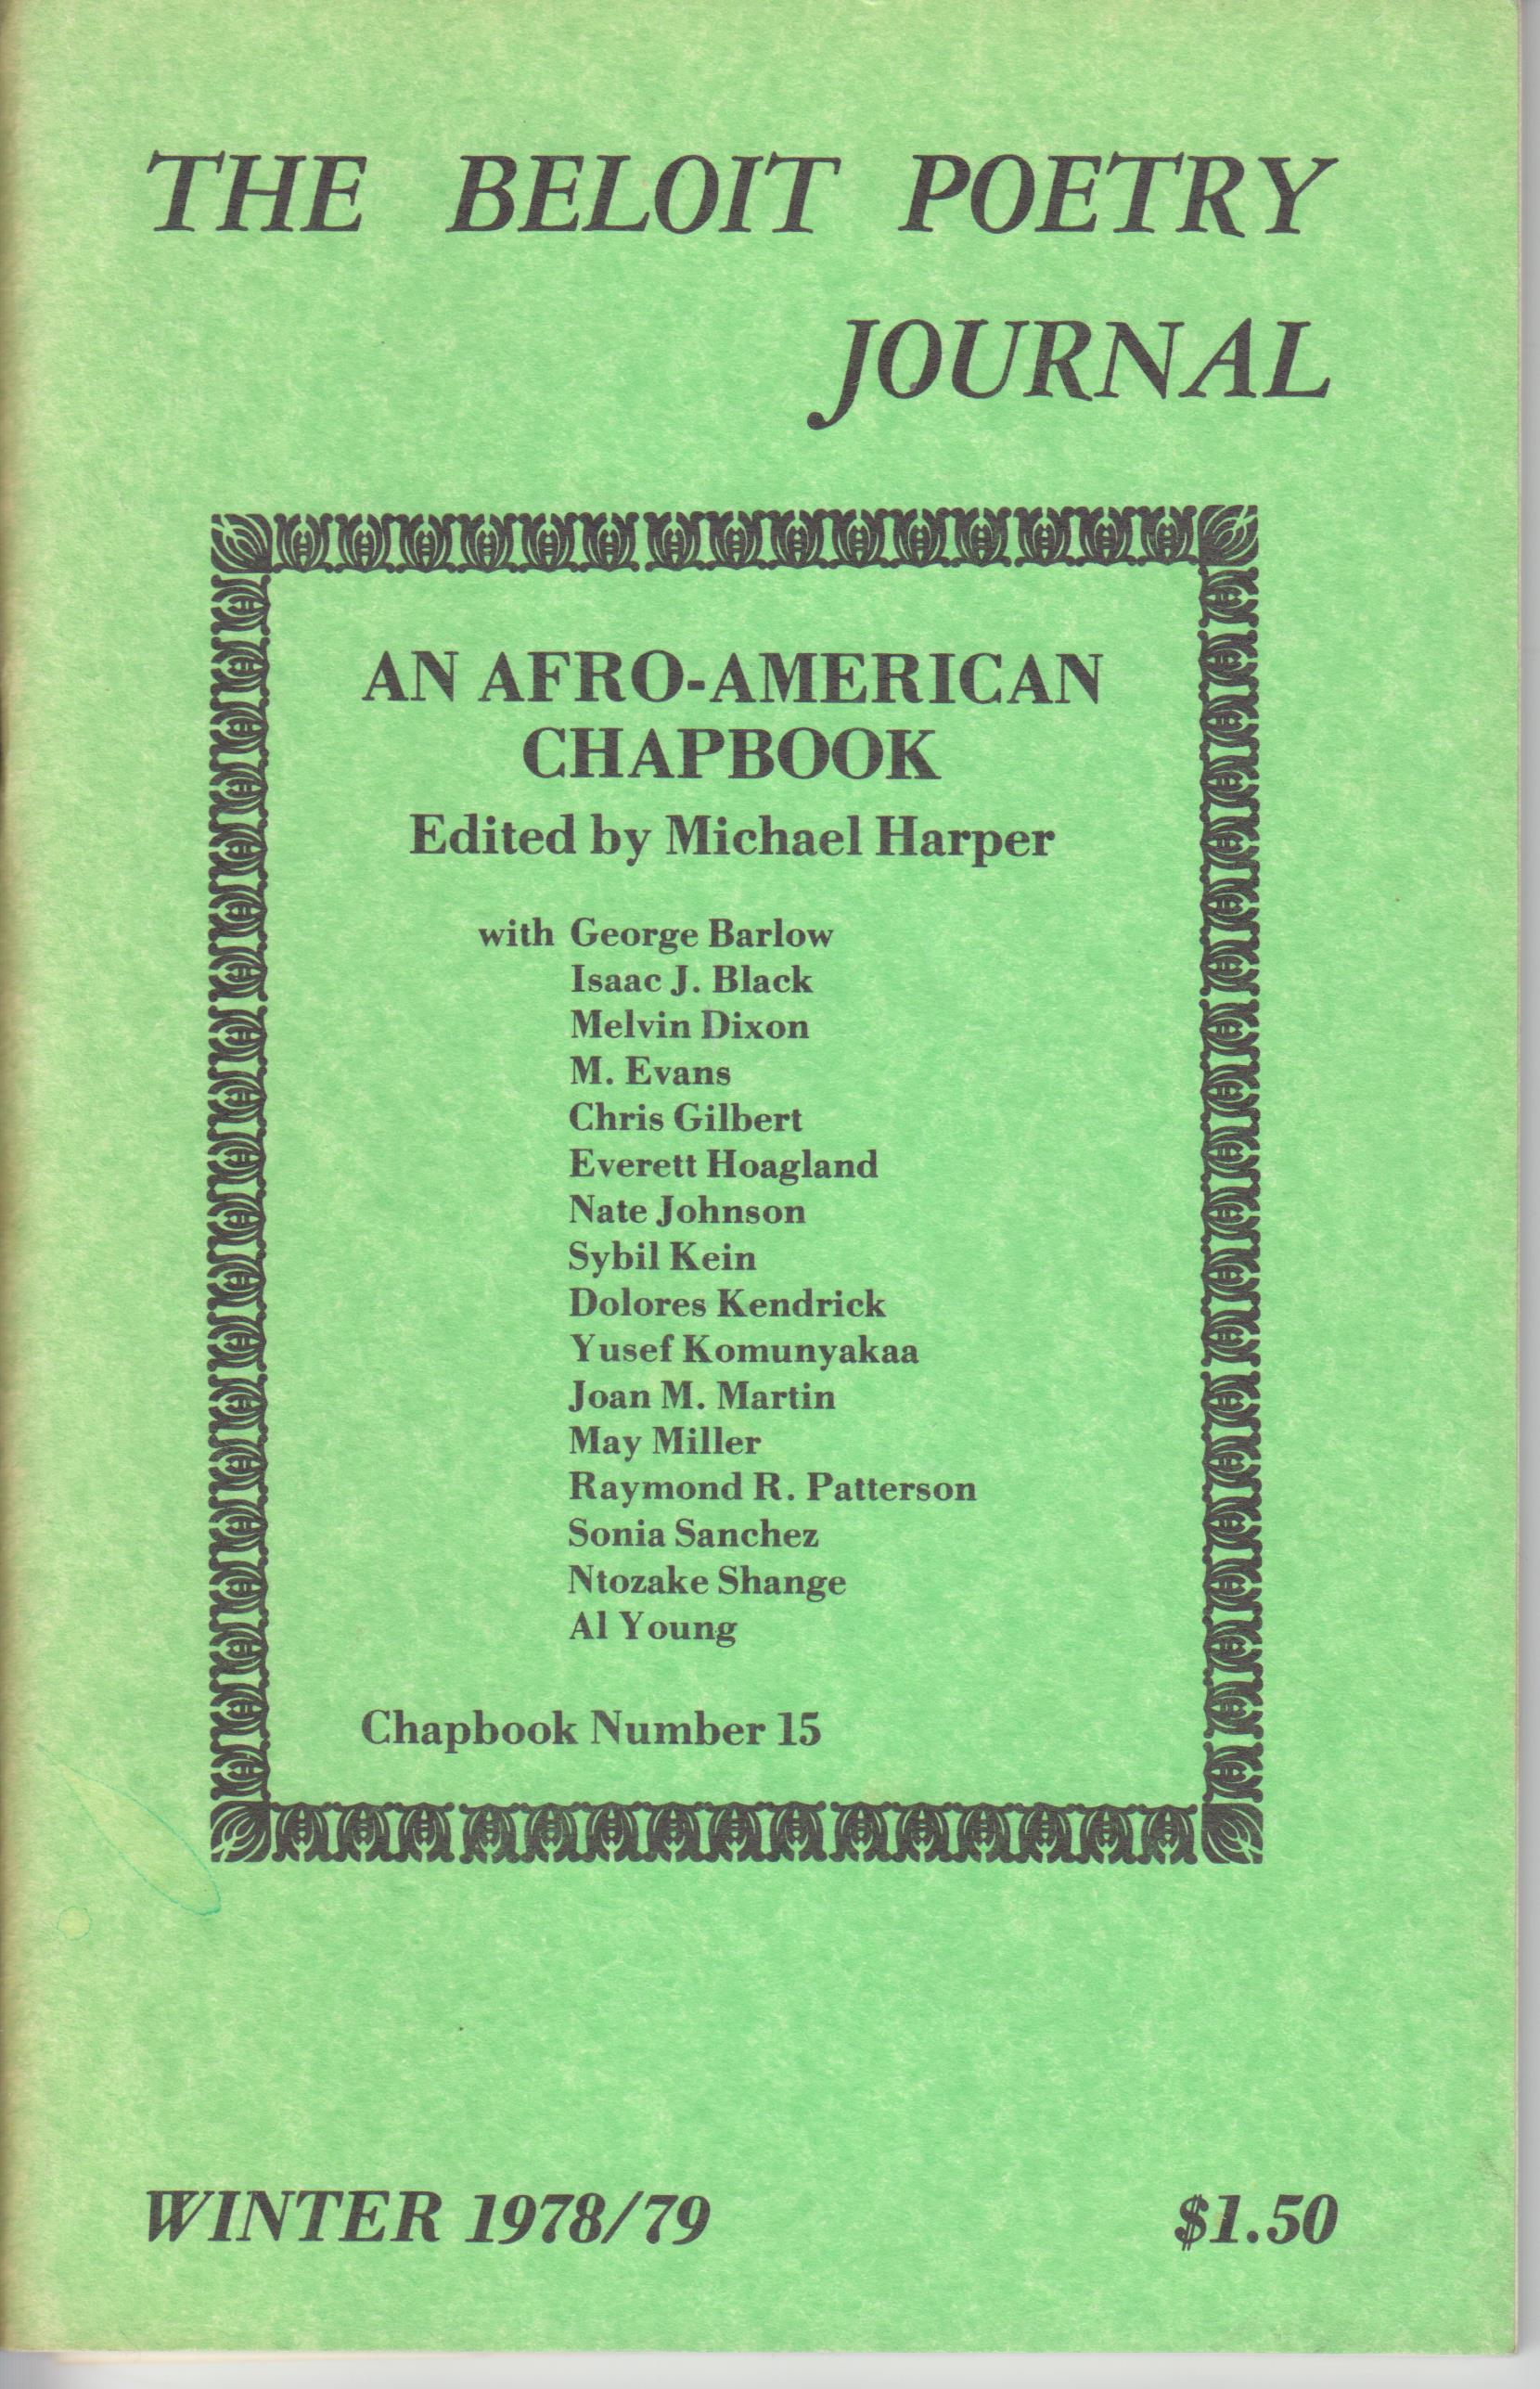 Image for The Beloit Poetry Journal (Winter 1978/79) An Afro-American Chapbook